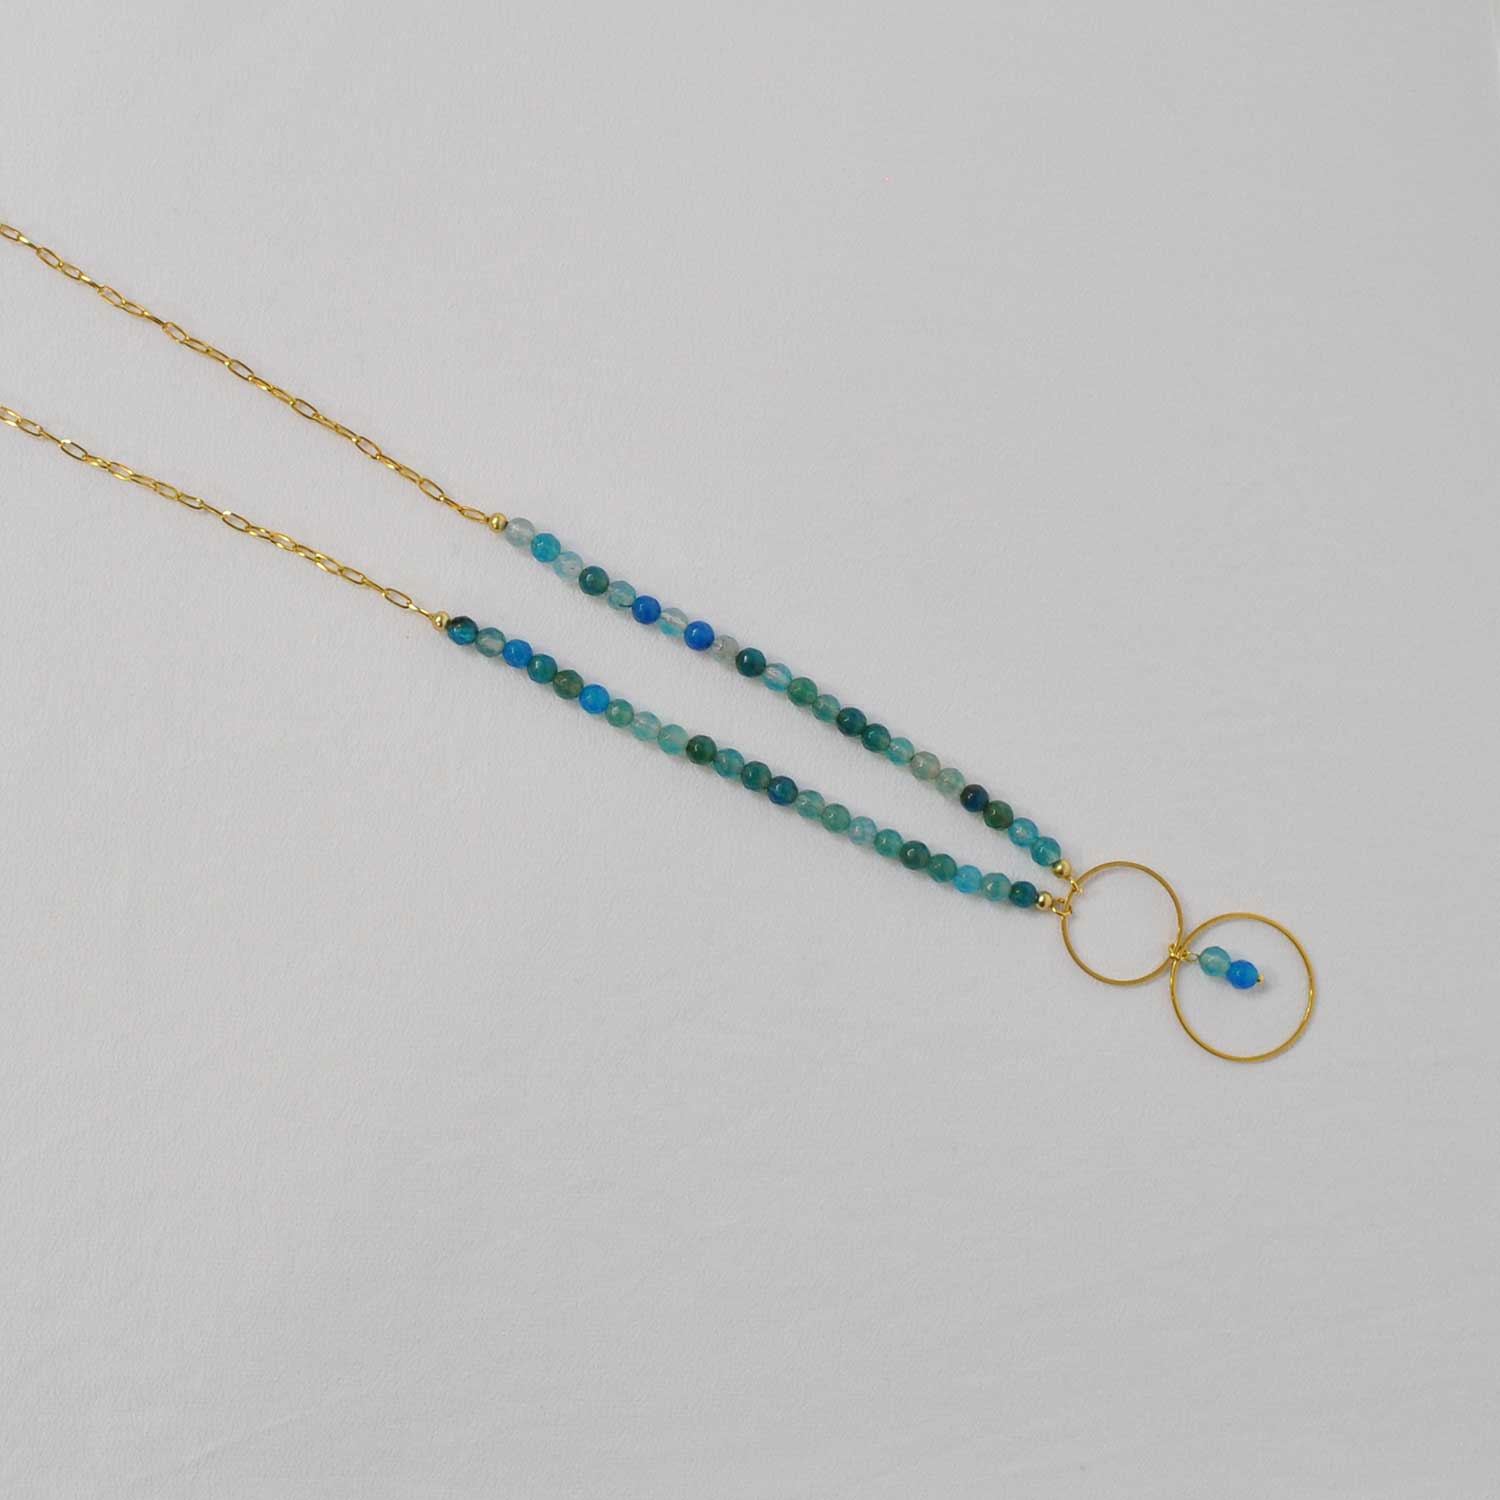 Blue hoops necklace